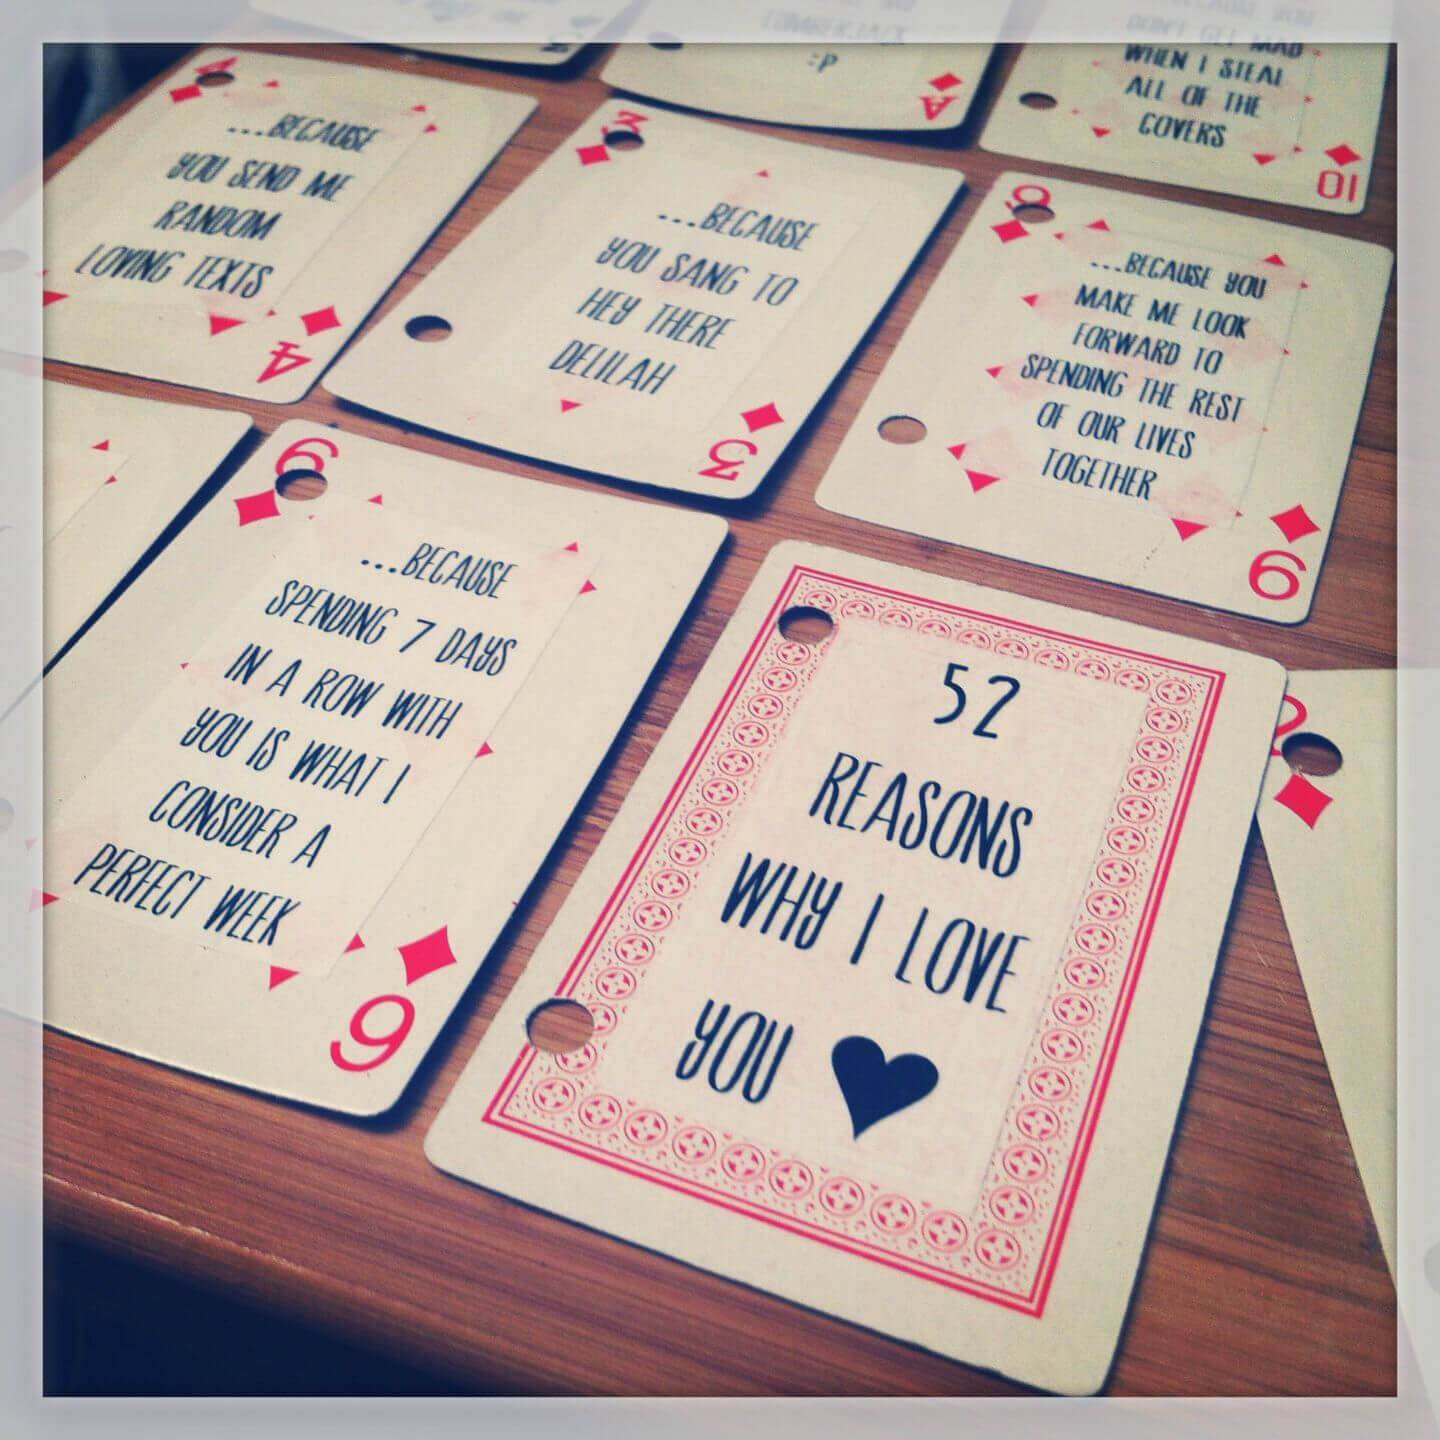 Pin On Gifts & Wrapping. Regarding 52 Things I Love About You Deck Of Cards Template